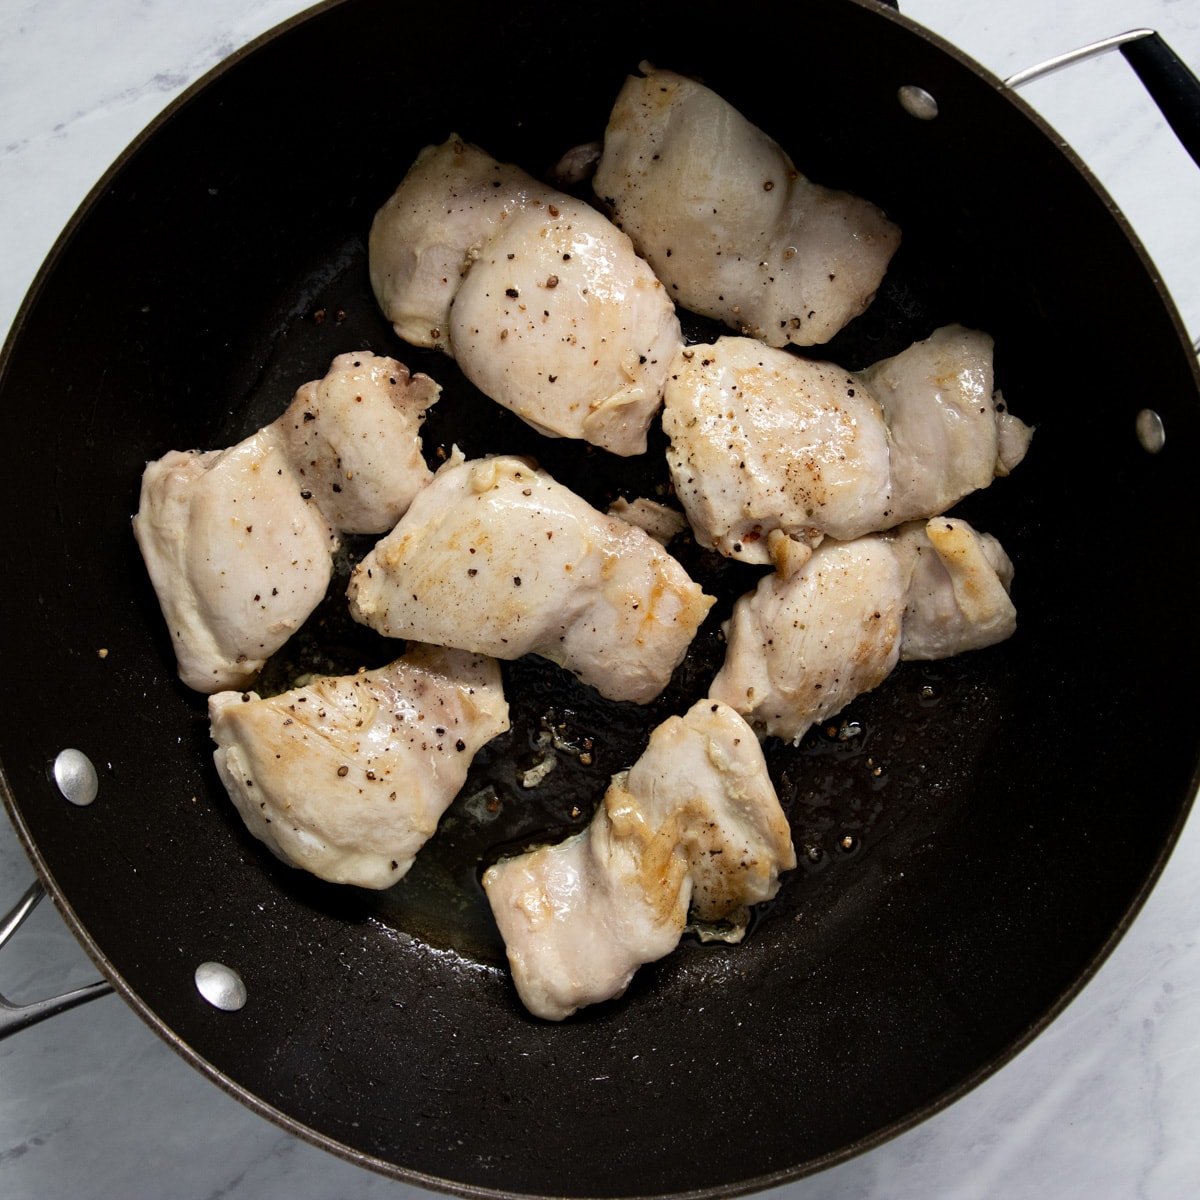 Lightly browned and seasoned boneless, skinless chicken thighs are in a non-stick skillet.